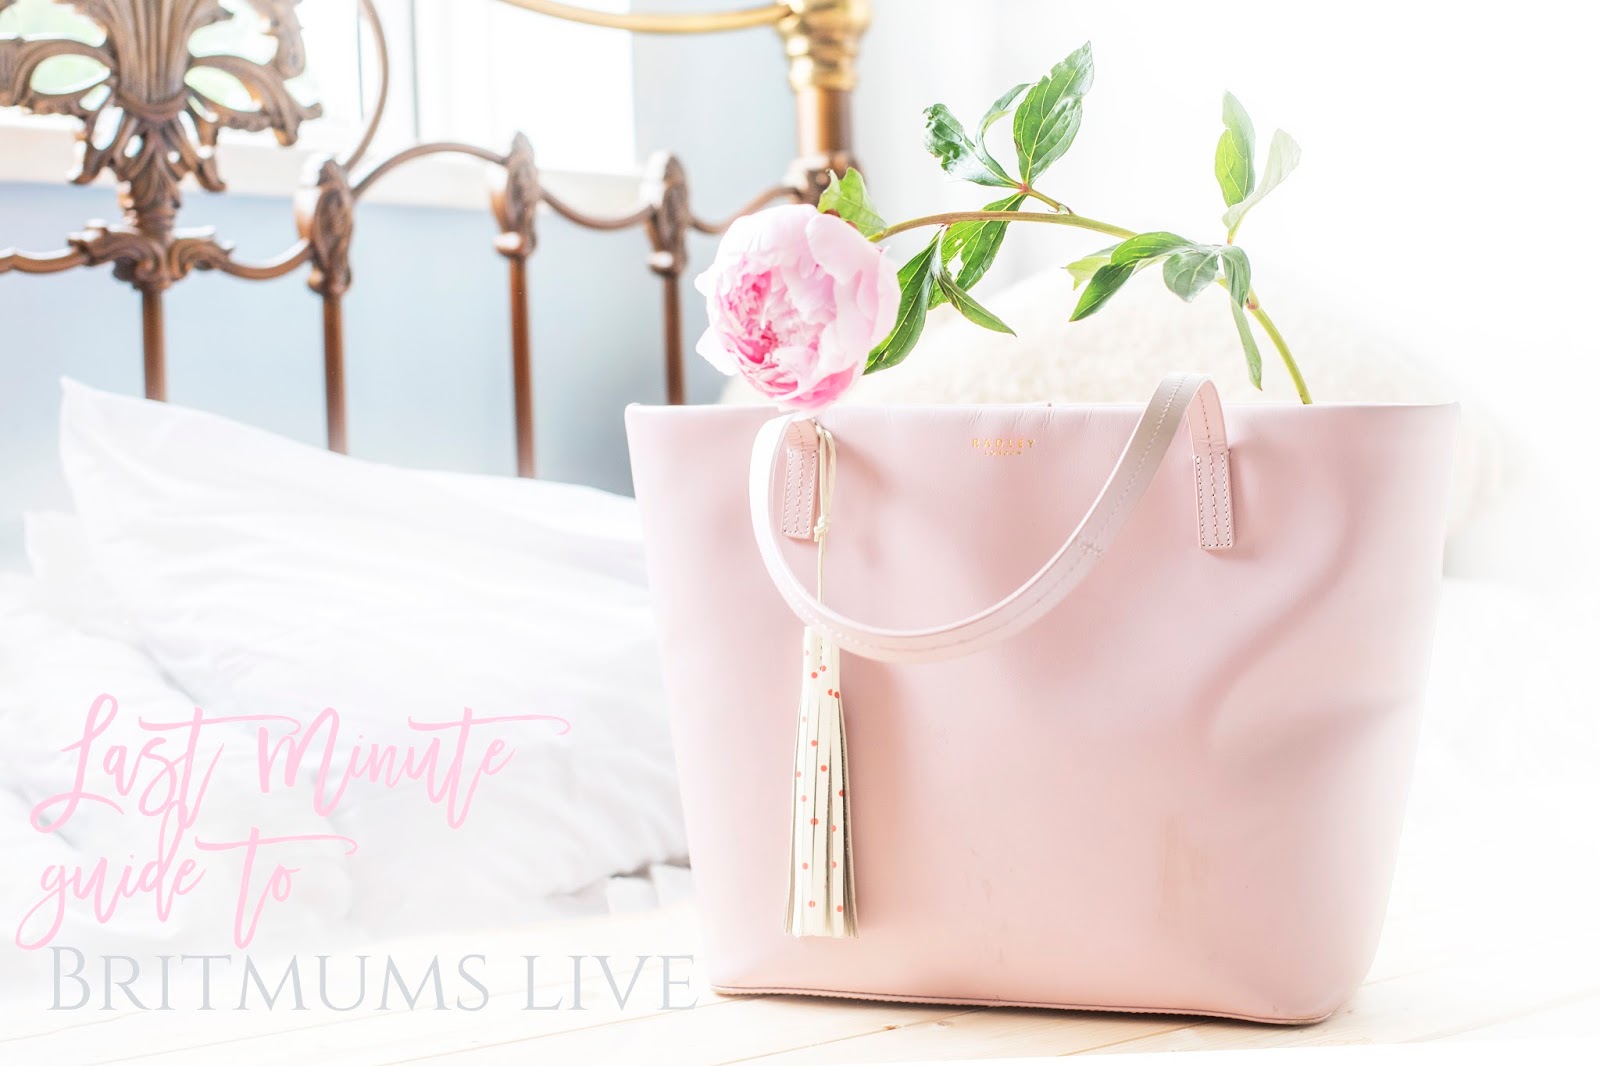 TEN STEPS: A LAST MINUTE GUIDE TO BRITMUMS LIVE